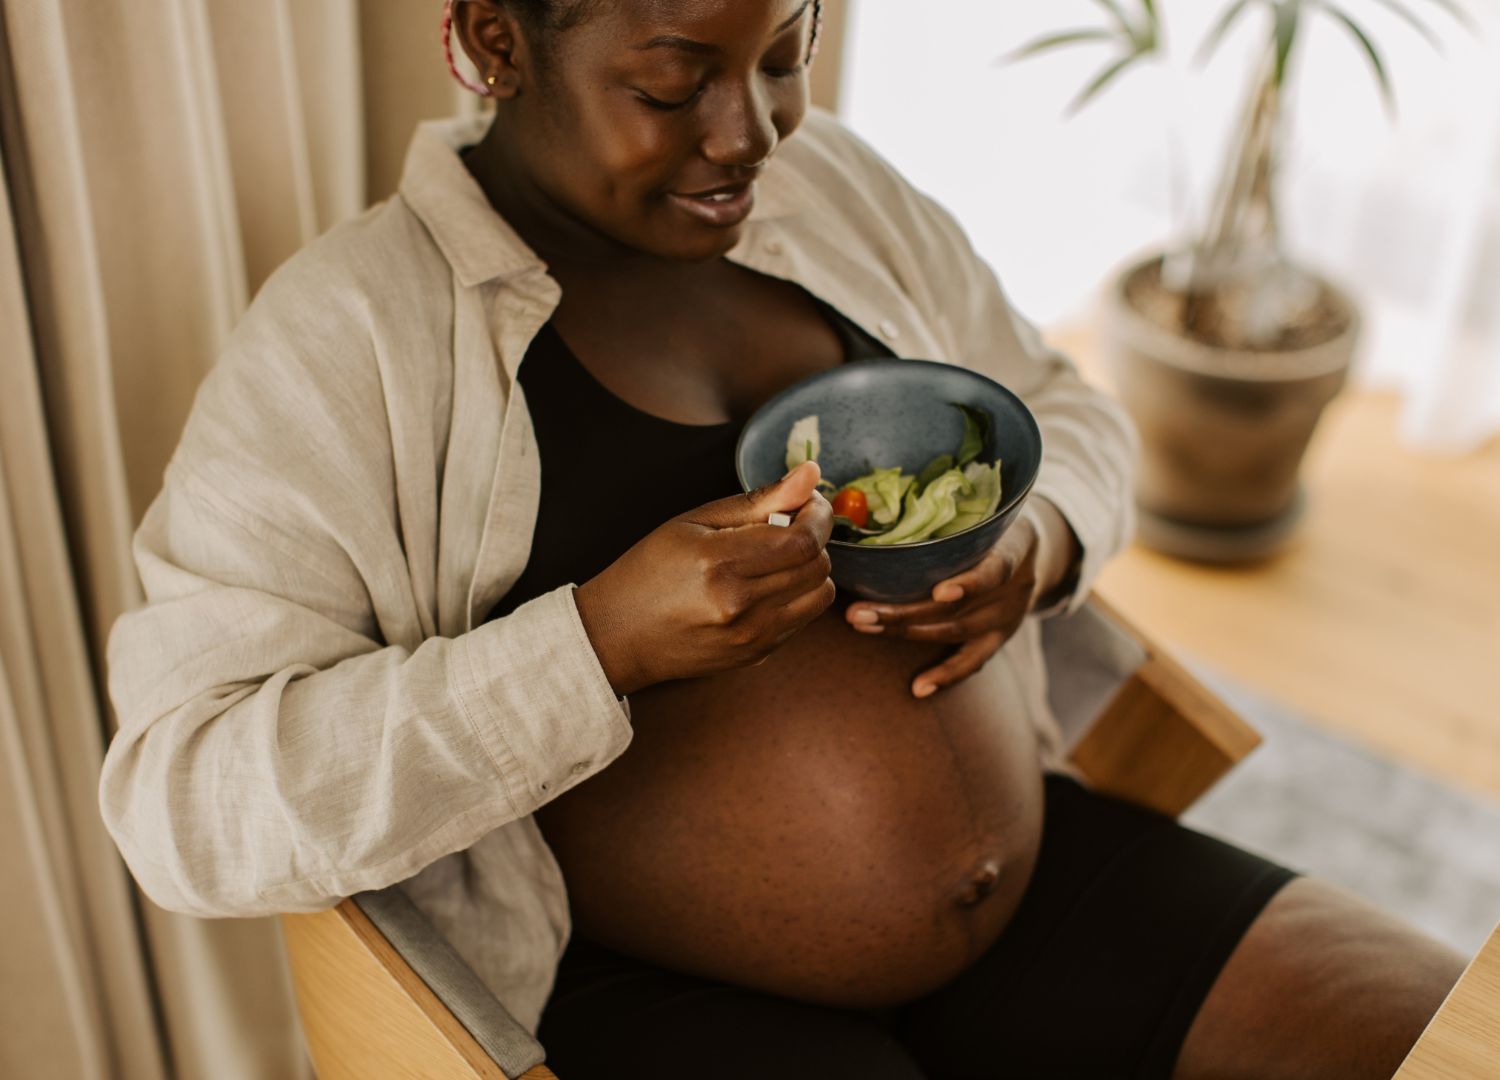 PREGNANCY, NUTRITION AND EXERCISE